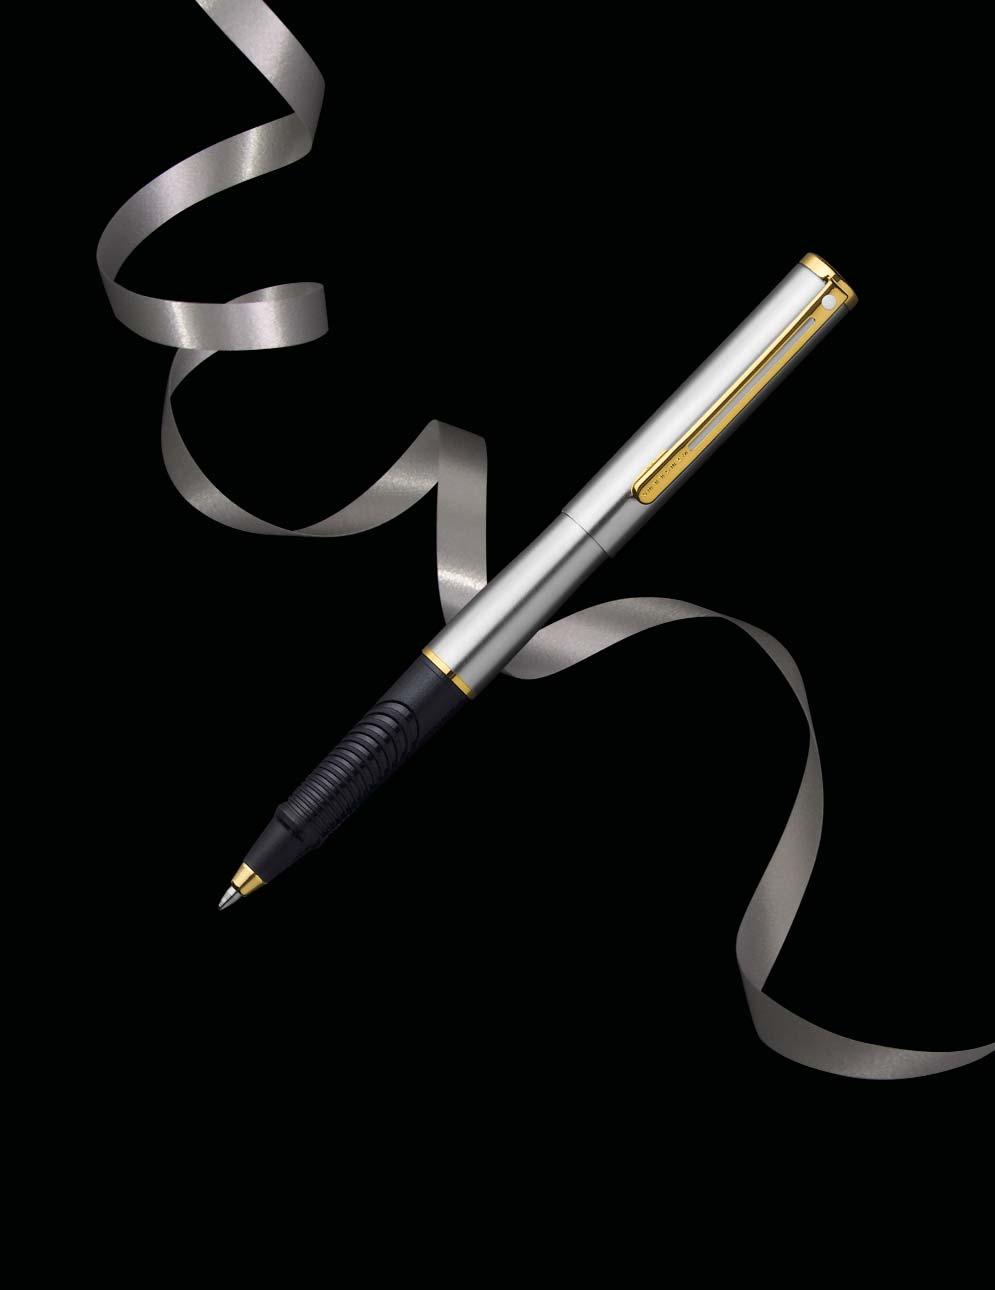 9001 9002 9003 Luxury Without Limitations The Sheaffer Agio Compact writing instrument is ultra sleek and ultra chic!